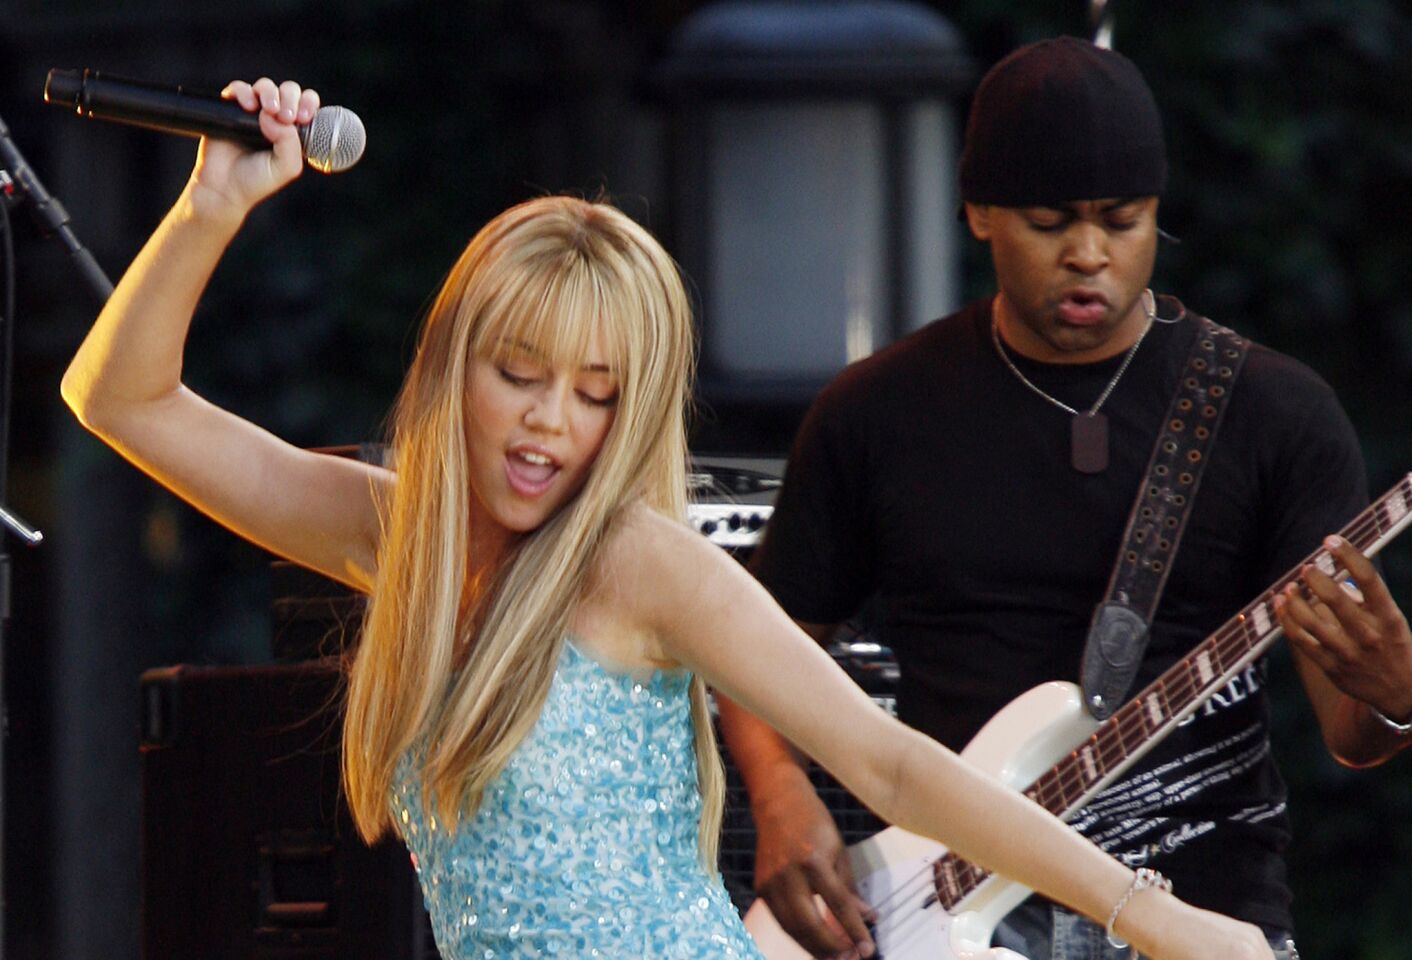 Miley played herself and her alter ego, Hannah Montana, in her 2007 tour, "Best of Both Worlds." Hard-core fans paid scalpers more than $1,000 for tickets to the show.